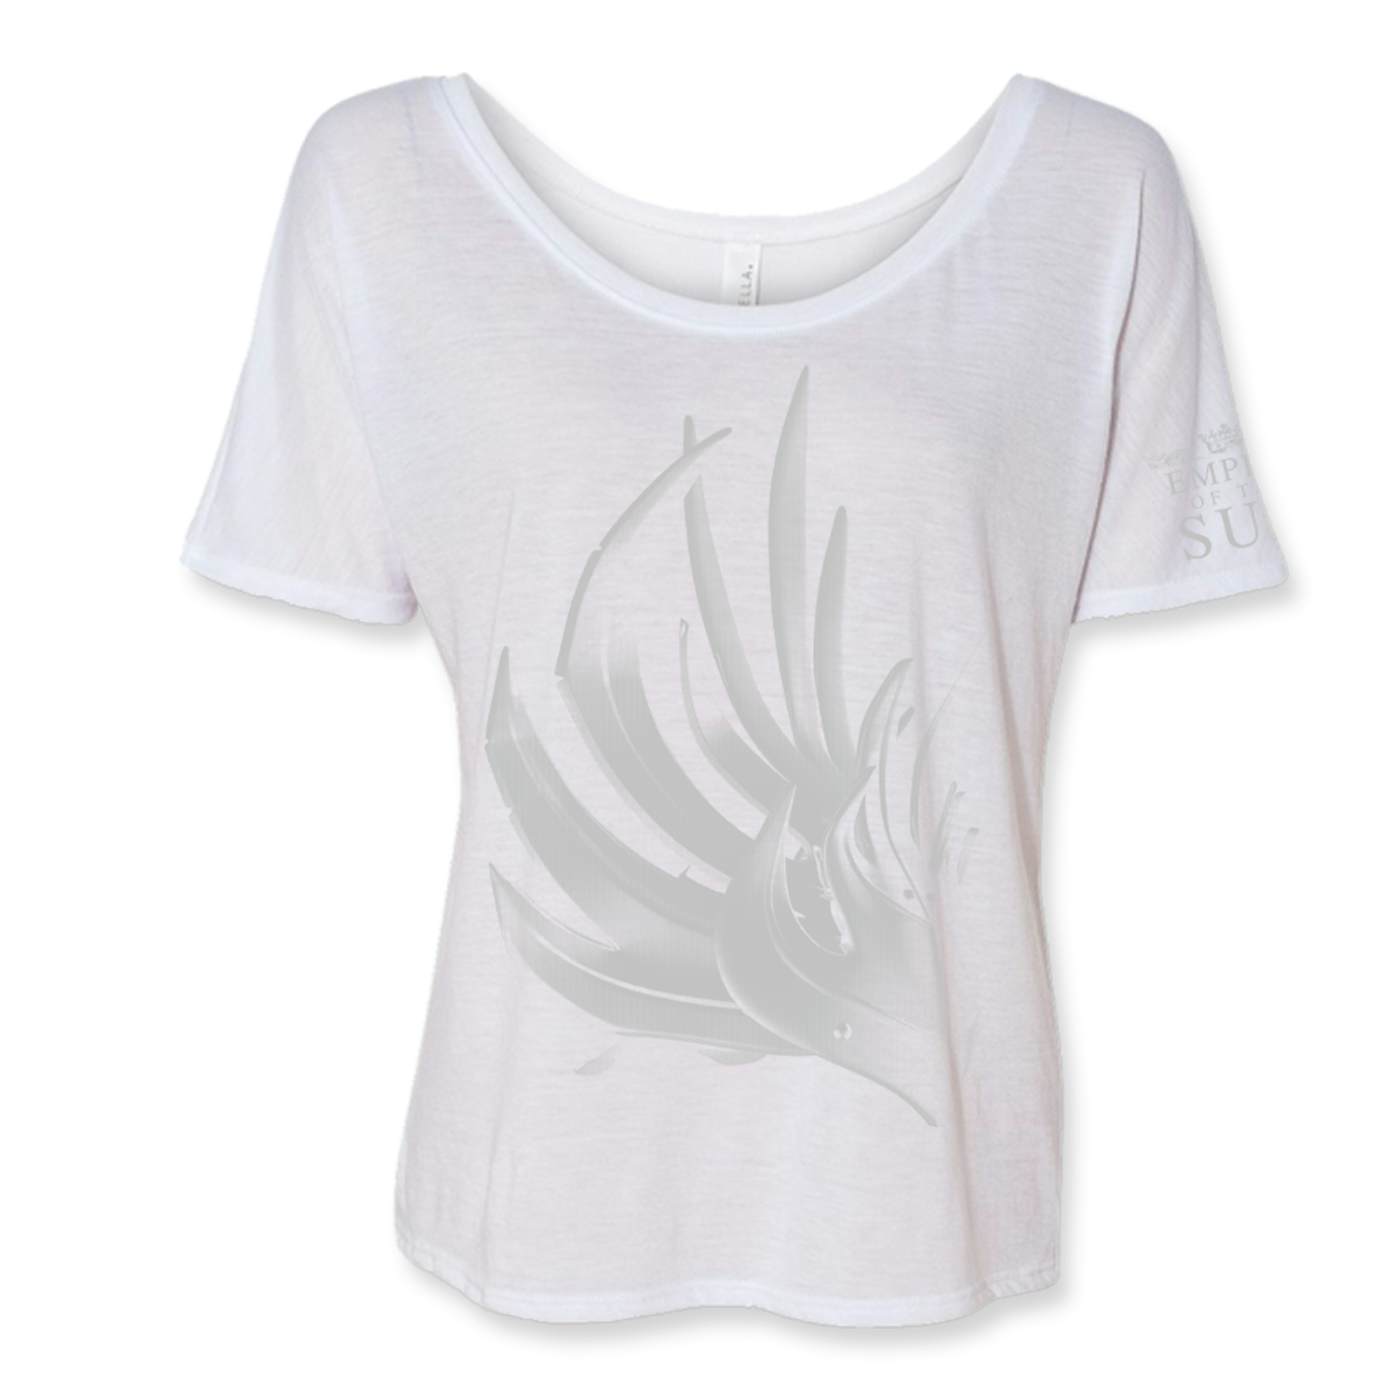 Empire of the Sun Women's Foil Crown Tee